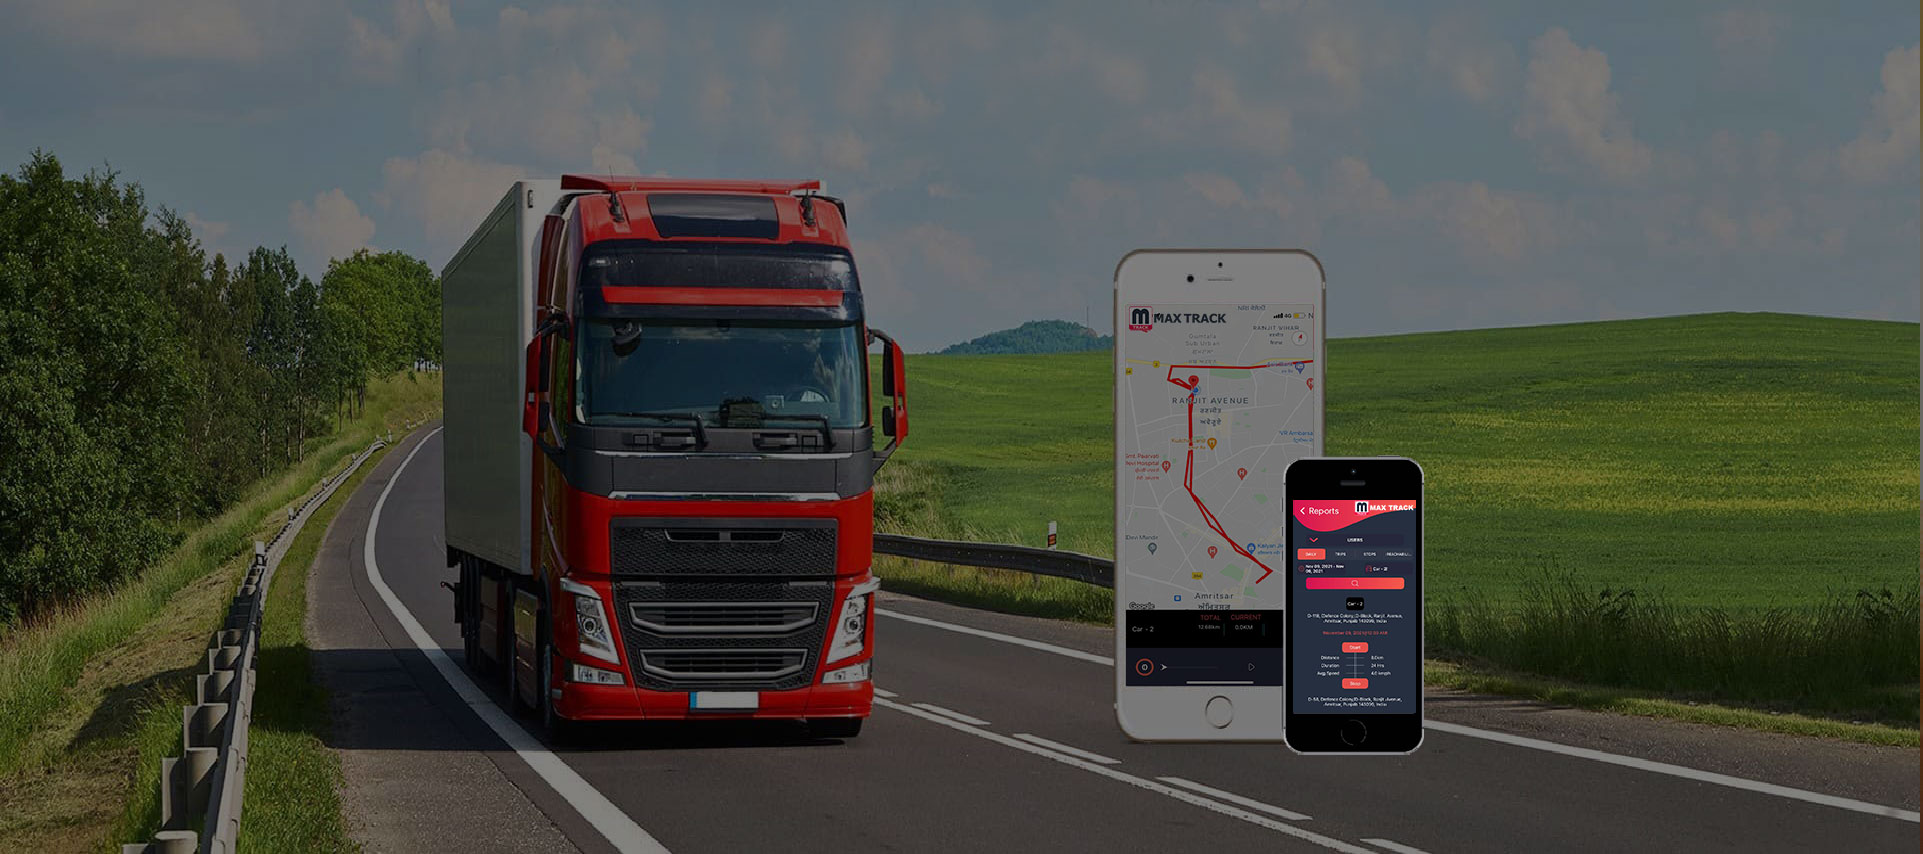 Vehicle tracking with live updates